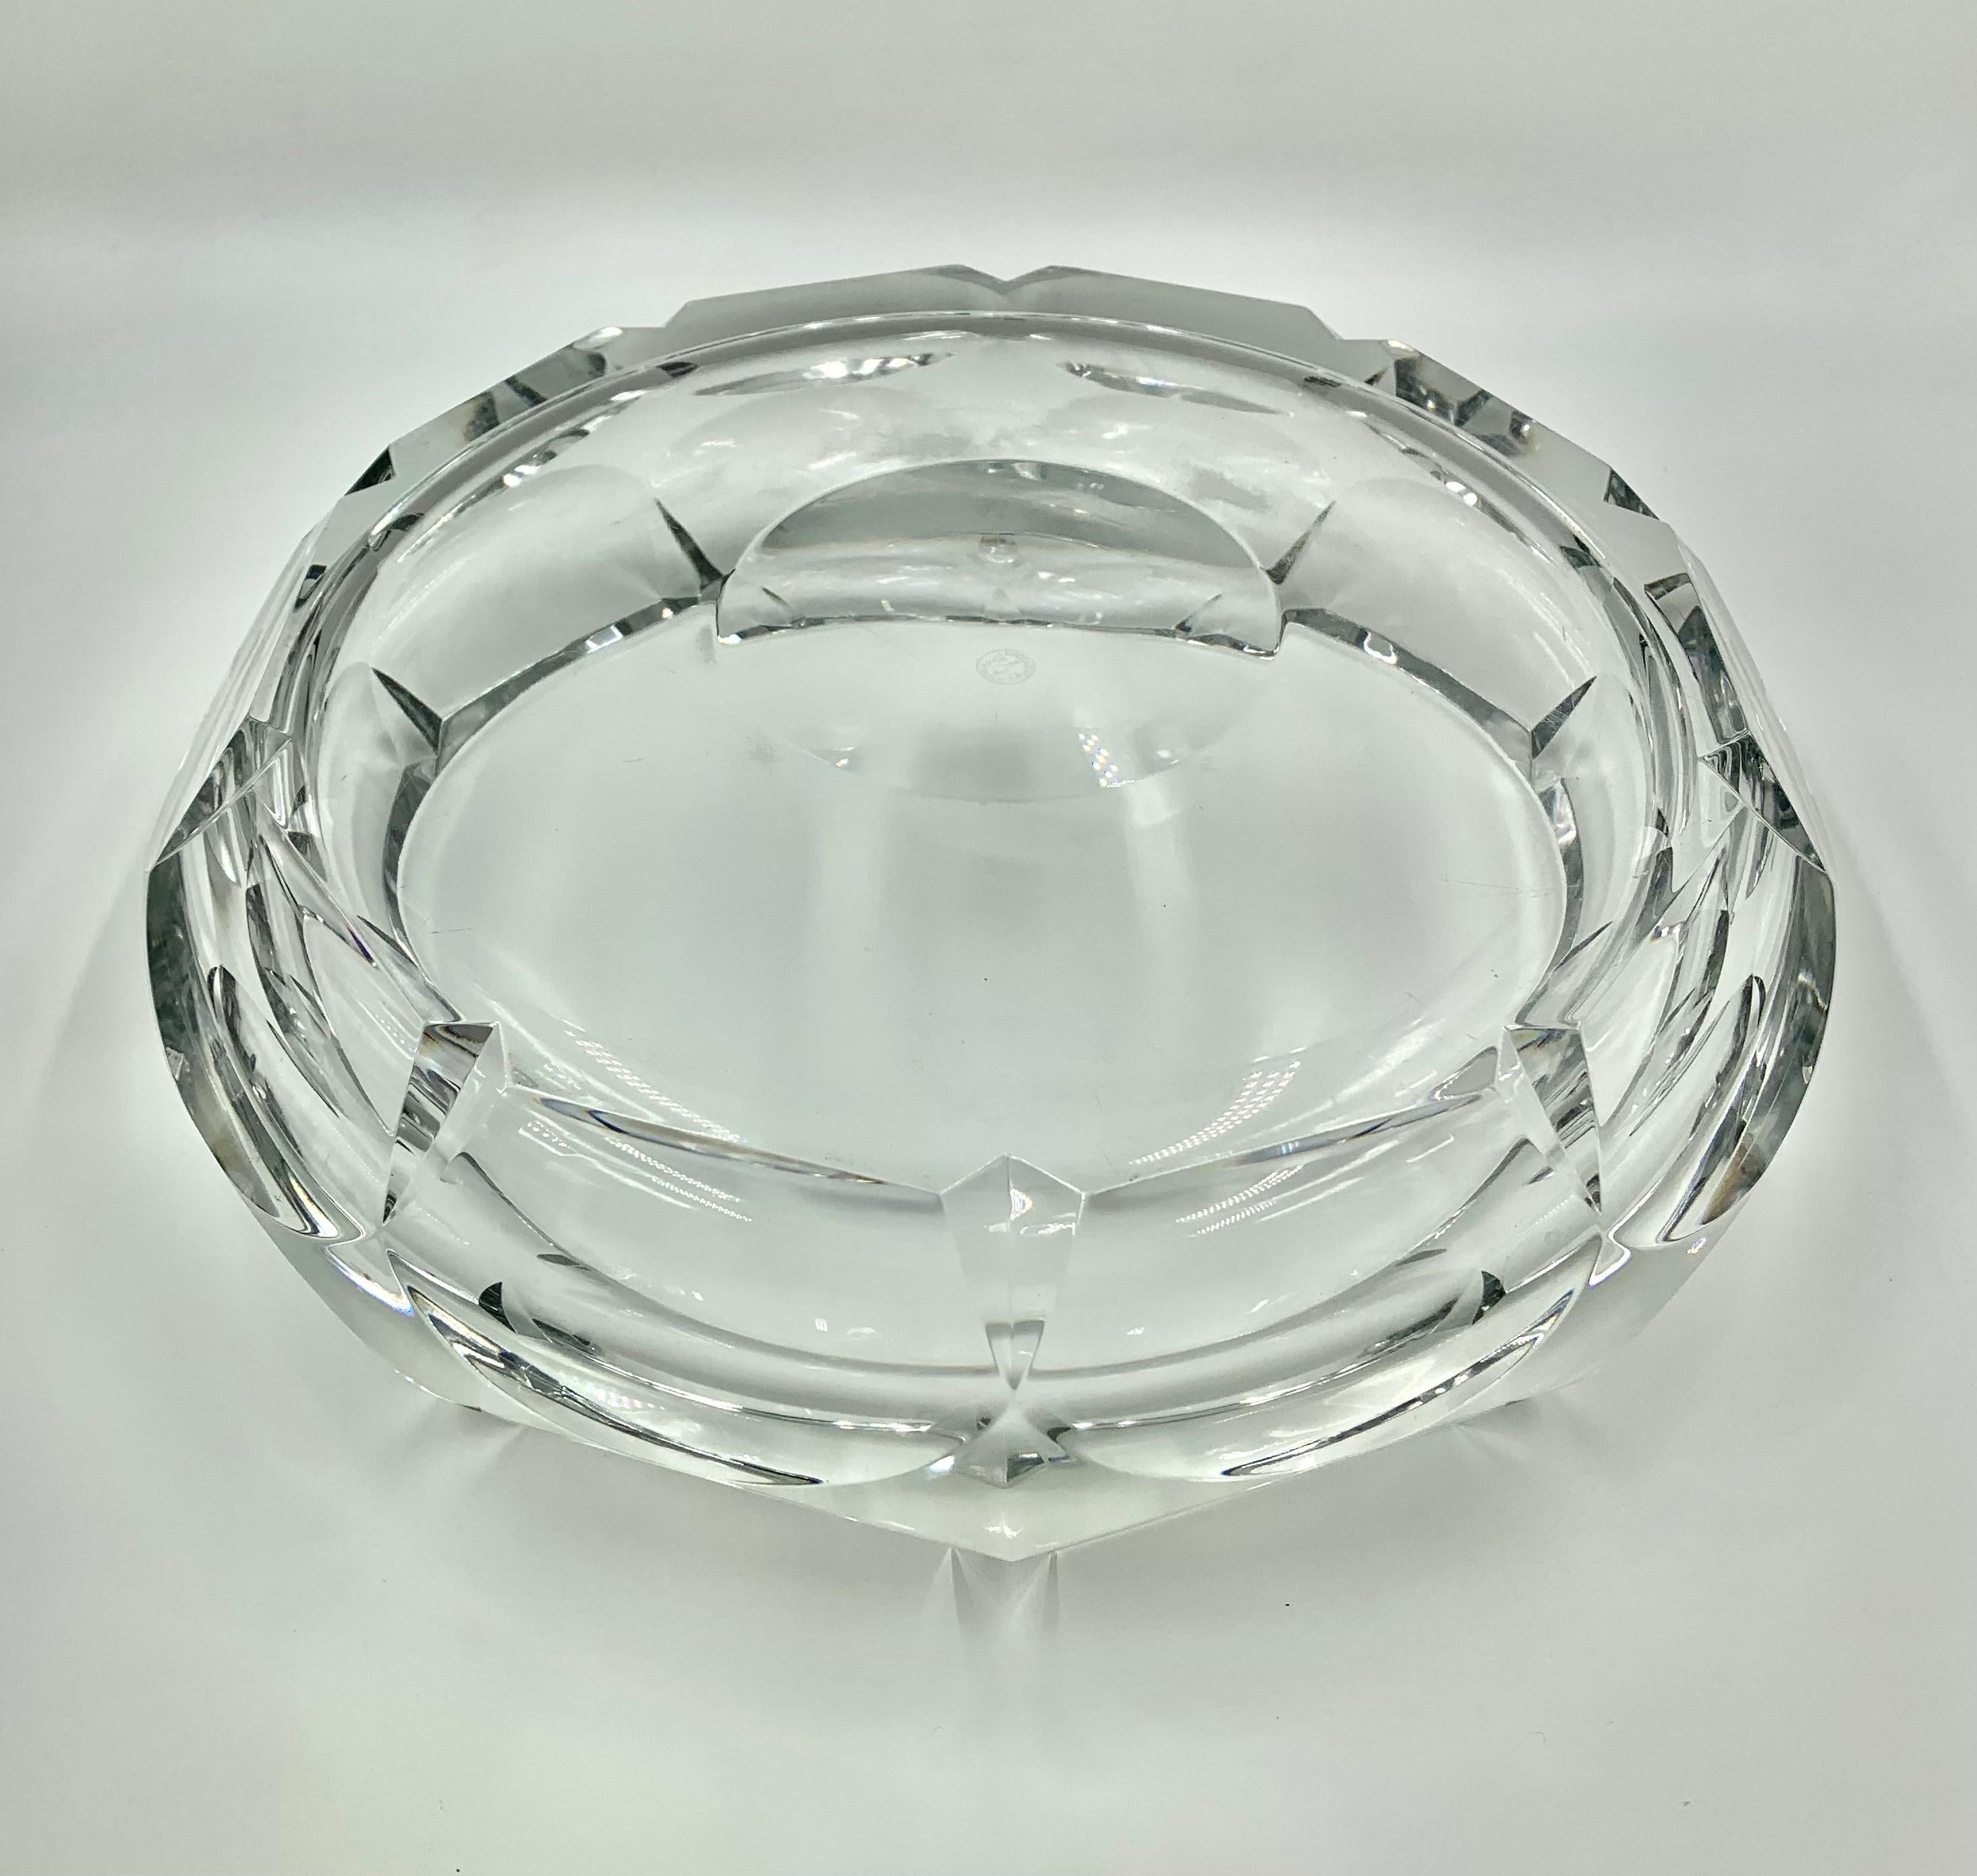 Massive Estate Baccarat Crystal Centerpiece, Early 20th Century For Sale 3